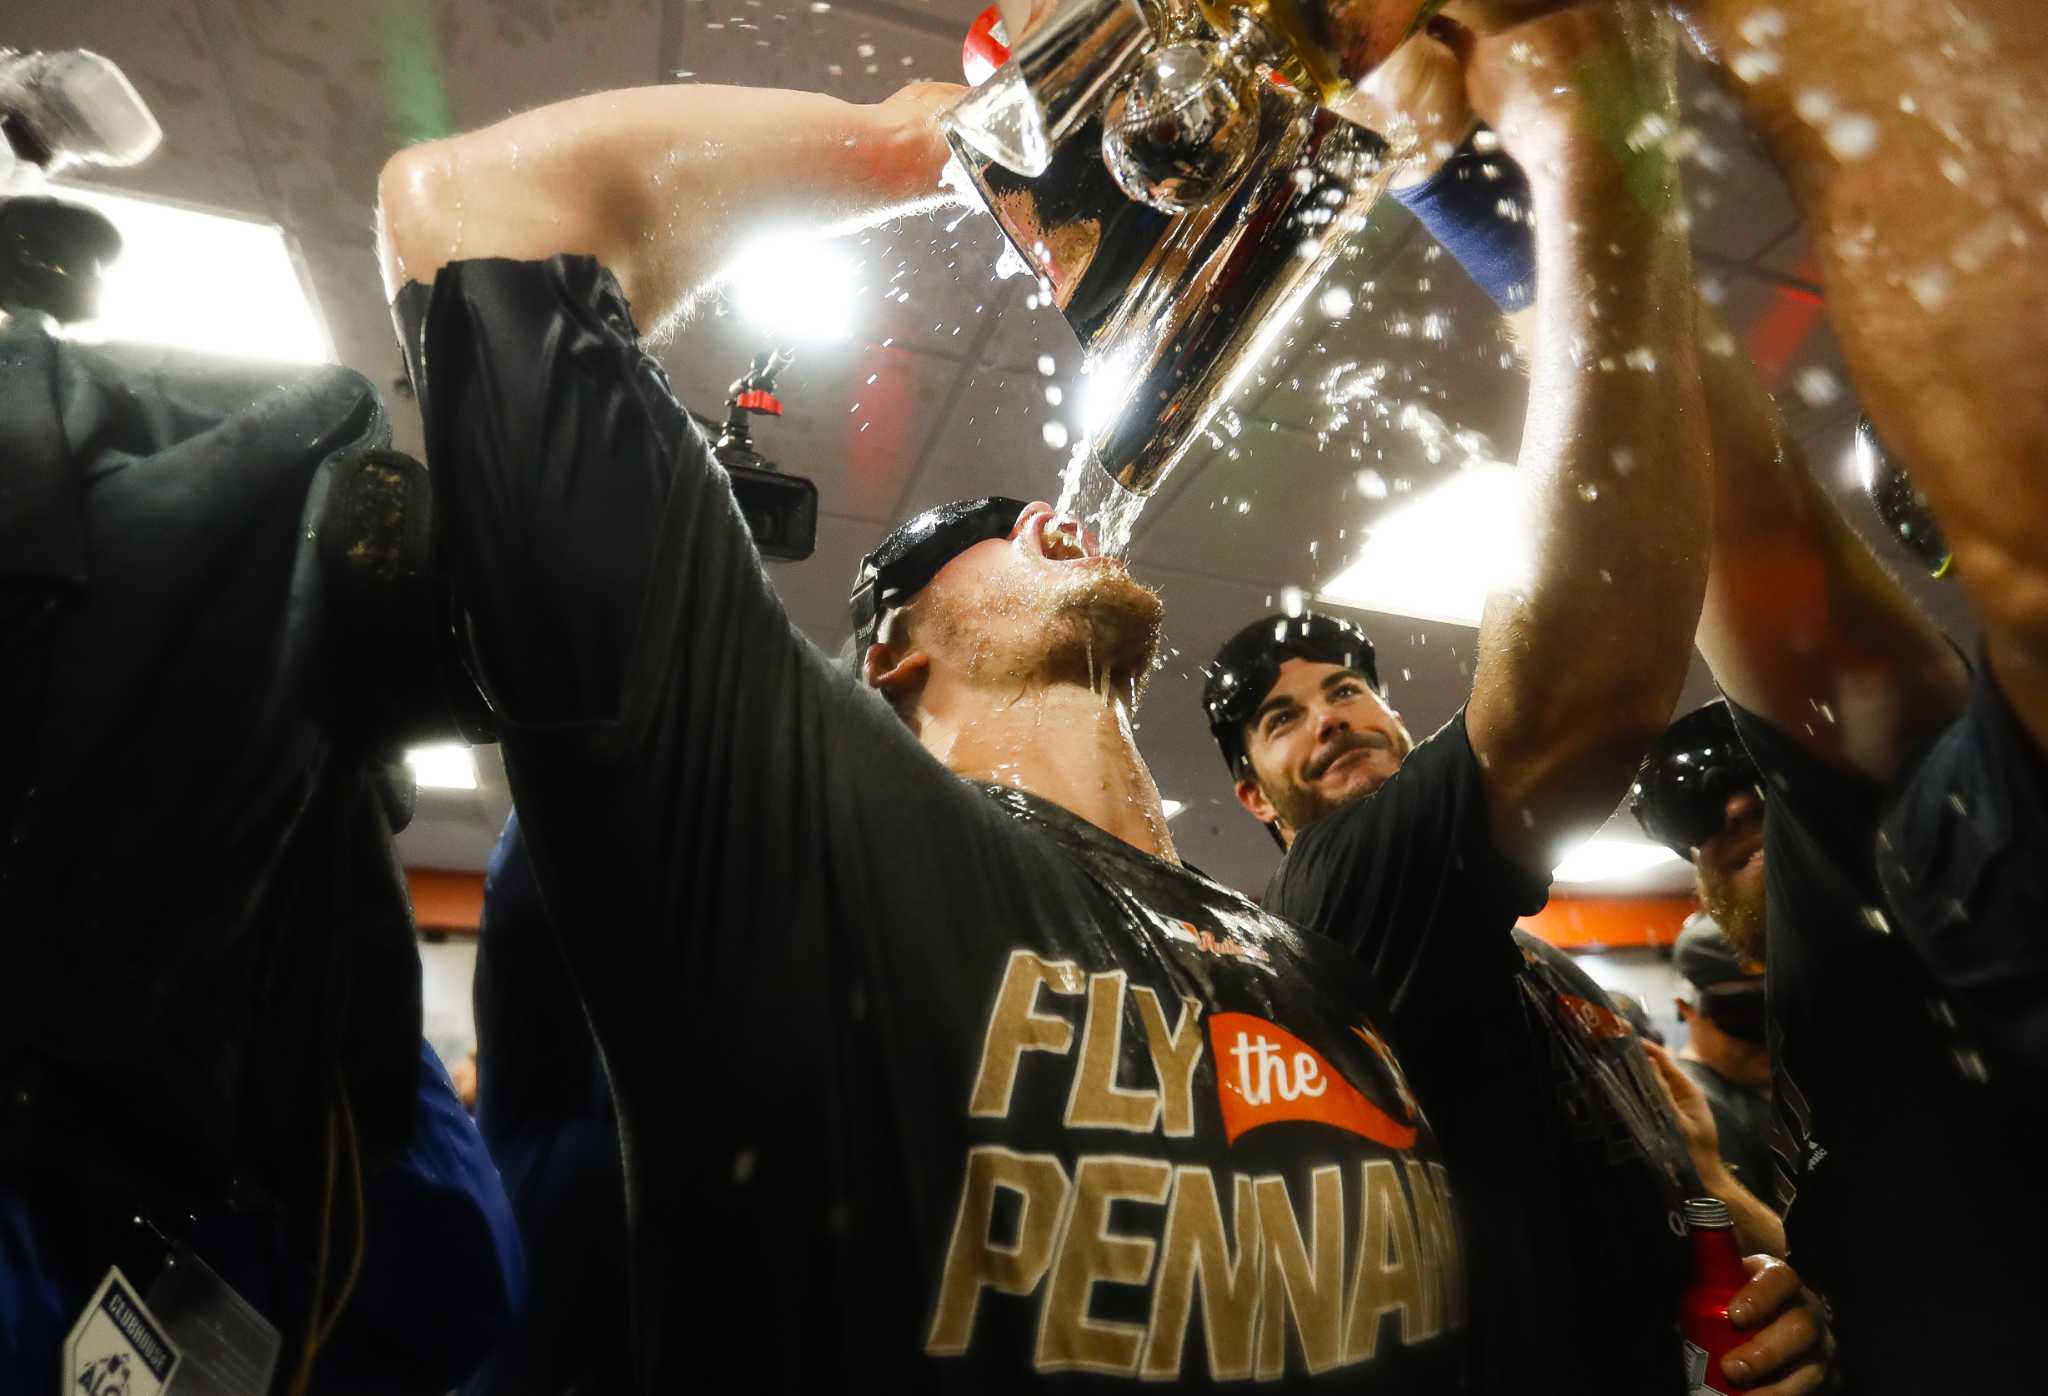 Astros celebrate trip to World Series with champagne